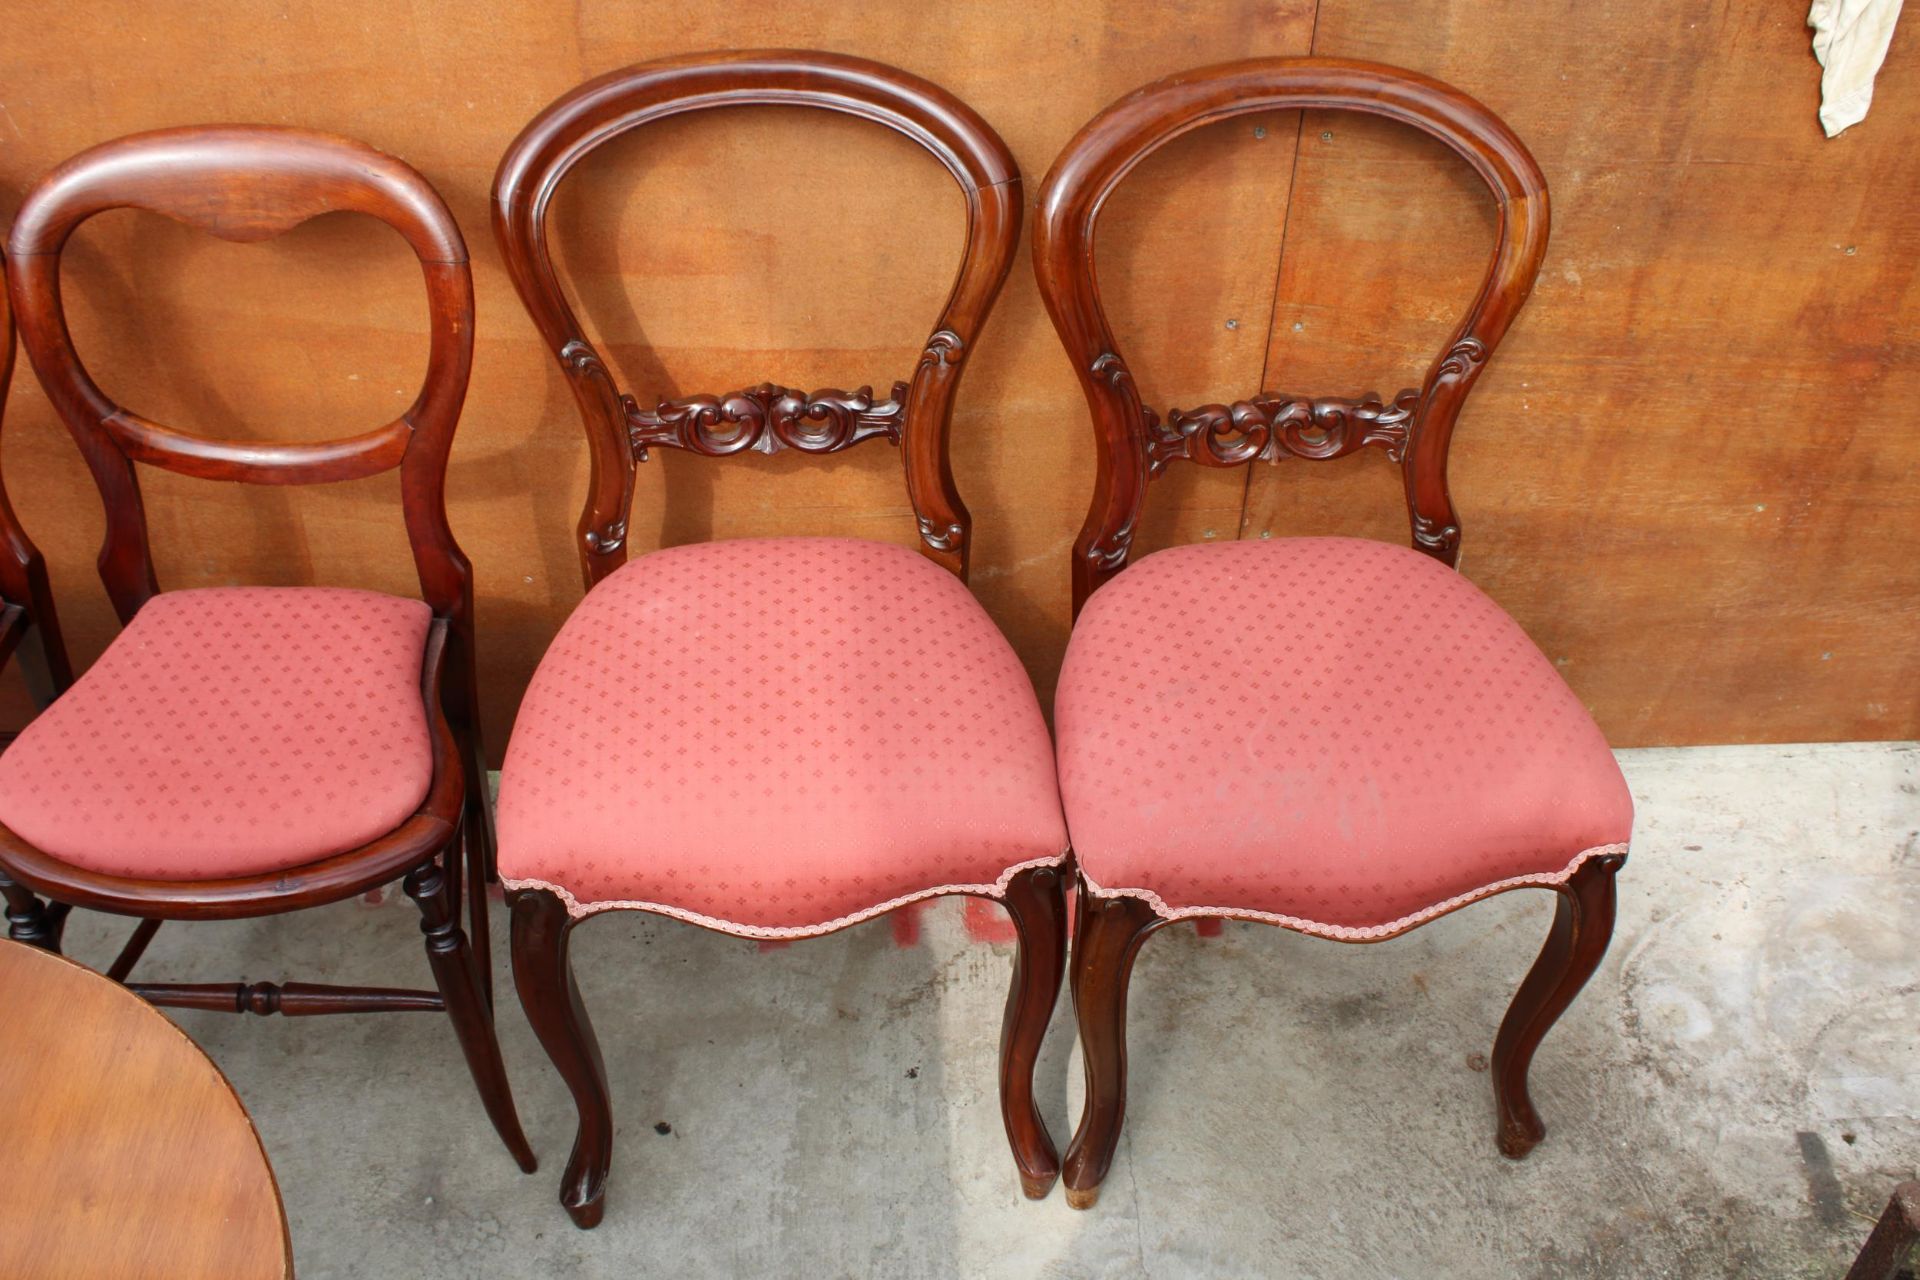 A PAIR OF VICTORIAN STYLE DINING CHAIRS AND A PAIR OF BEDROOM CHAIRS - Image 2 of 3